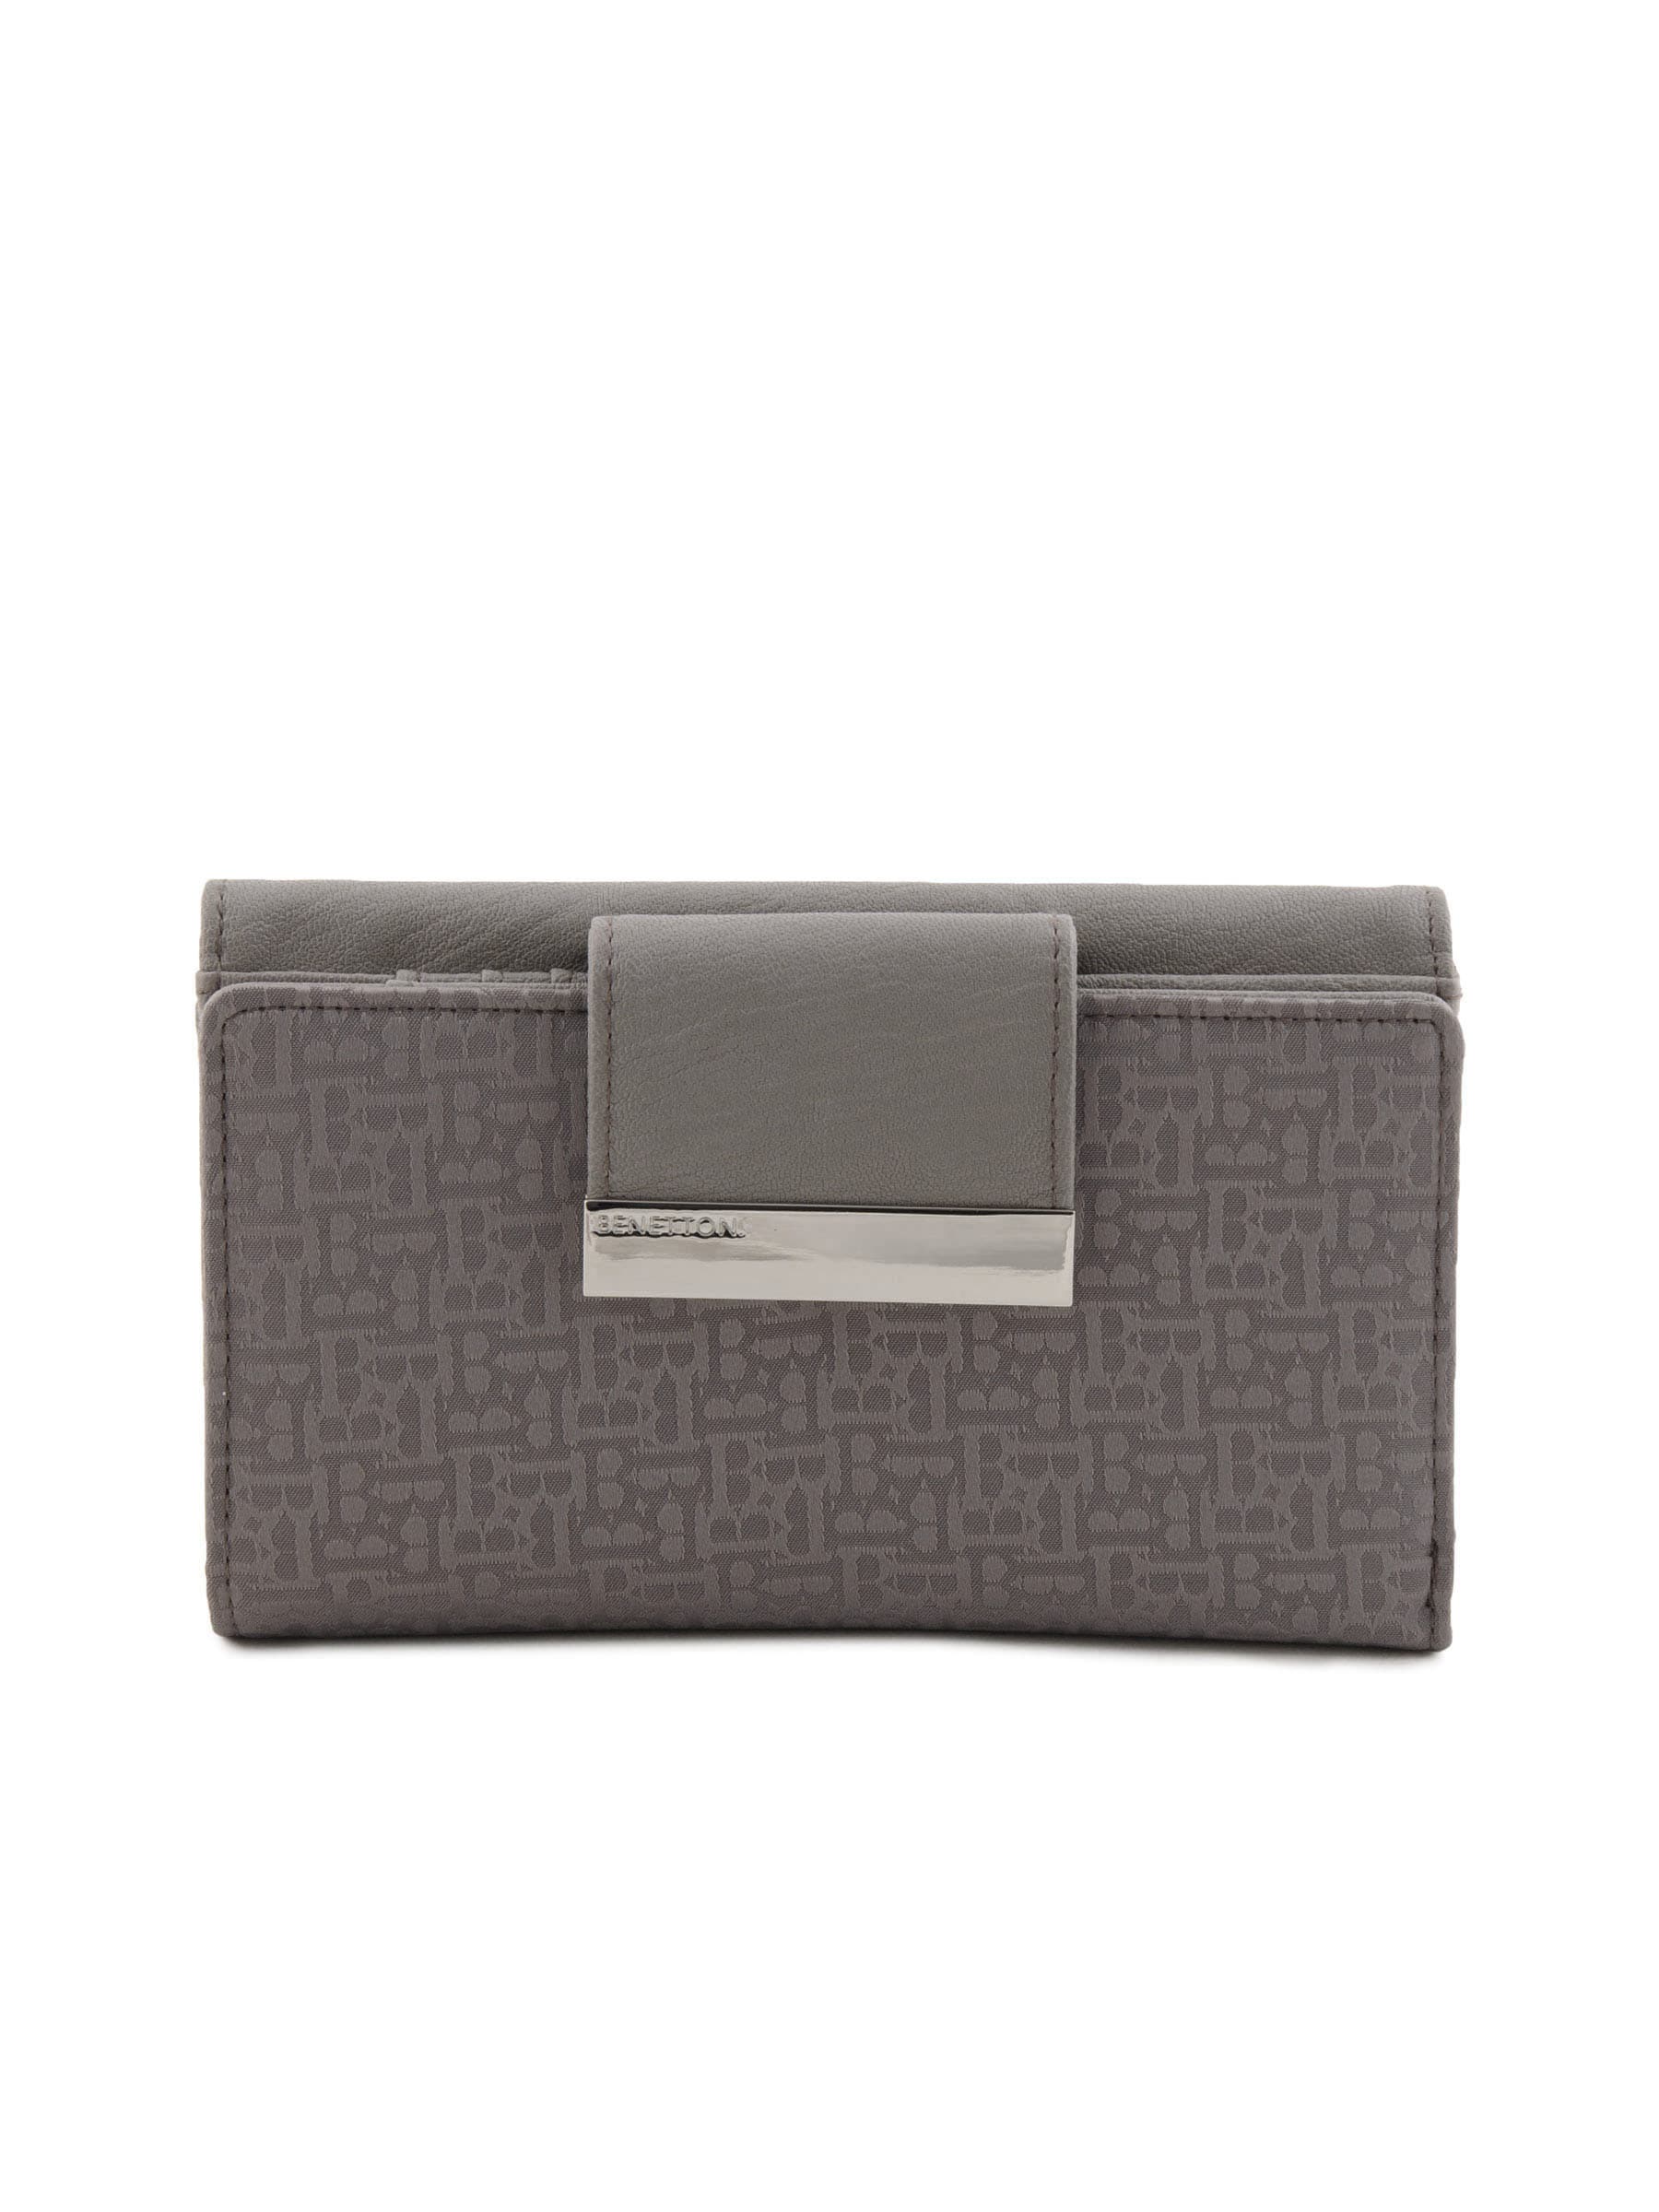 United Colors of Benetton Women Casual Grey Wallet